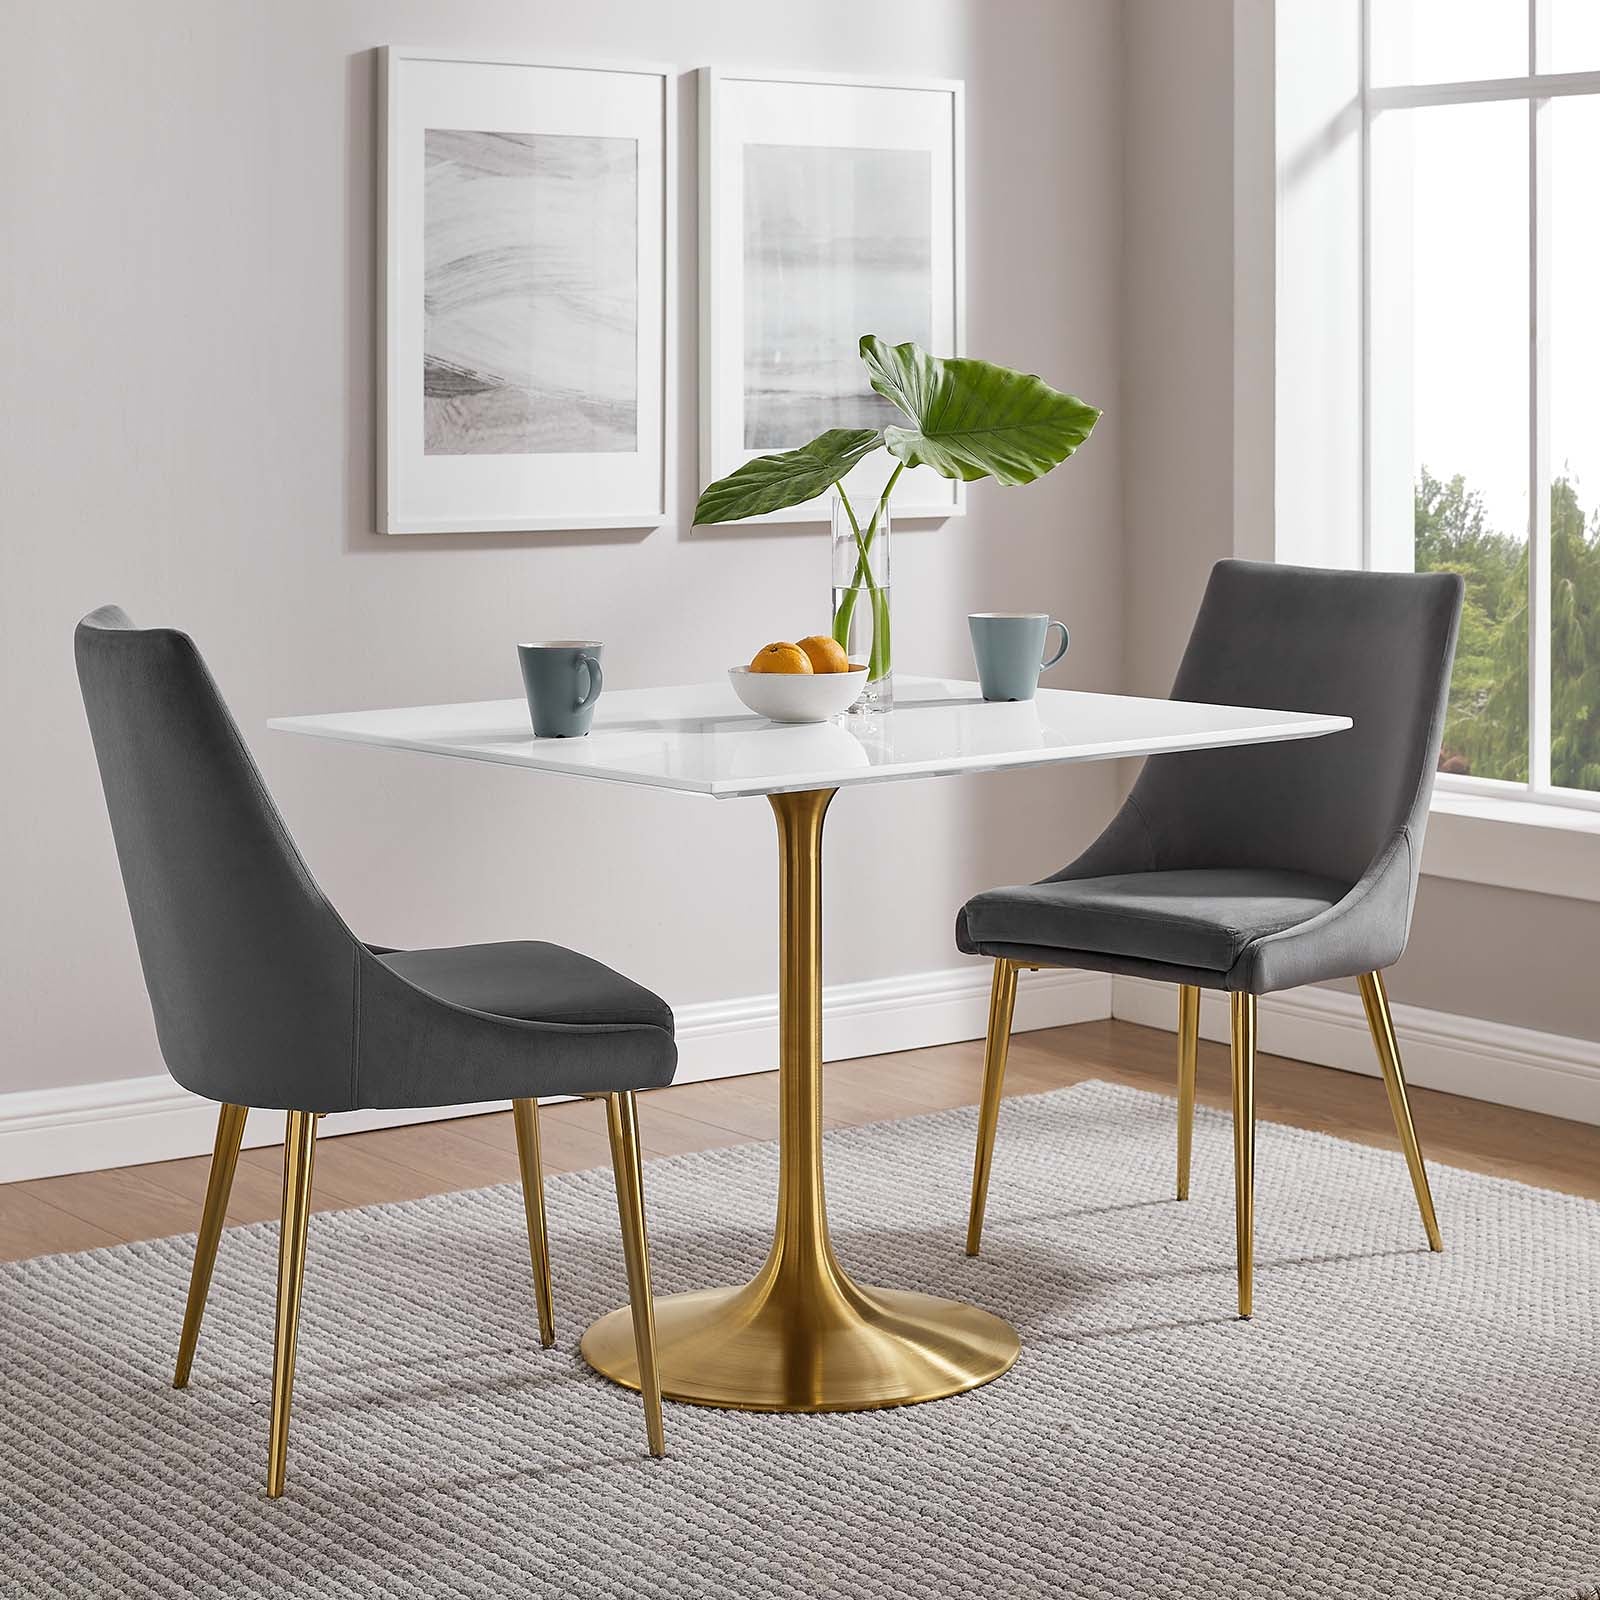 Lippa 36" Square Wood Top Dining Table - East Shore Modern Home Furnishings